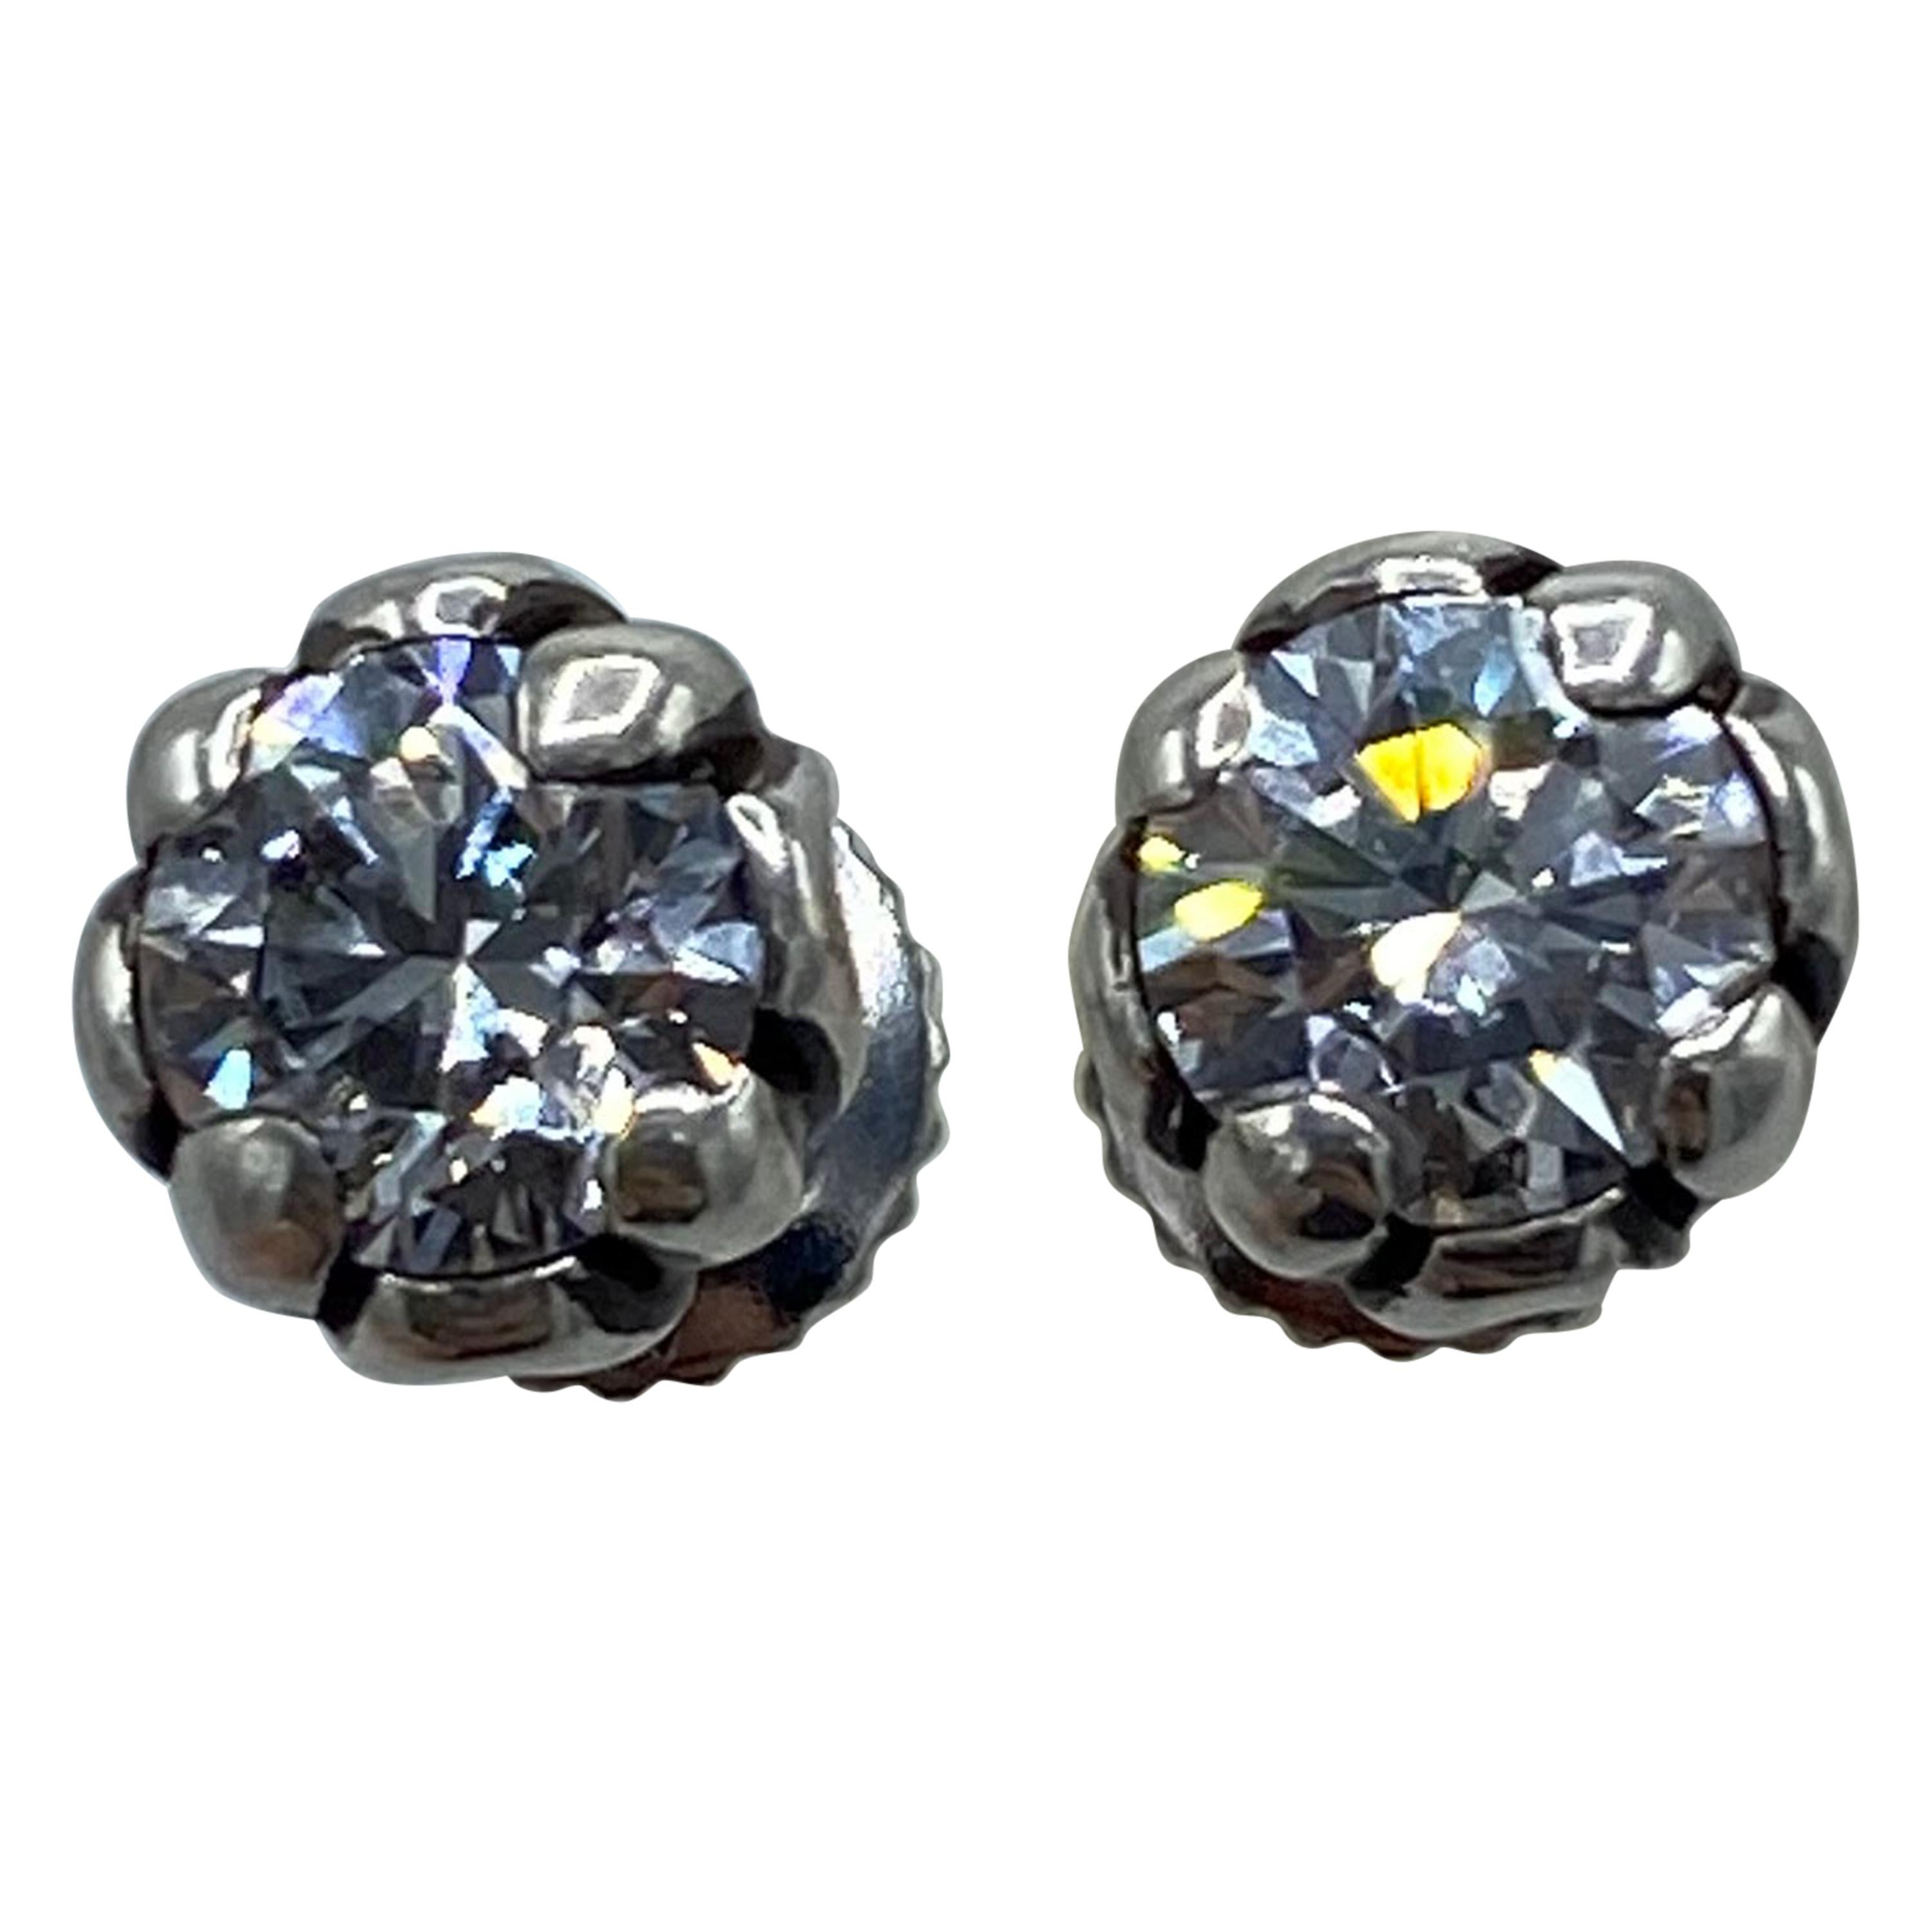 Vintage Chrome Hearts White Gold And Diamond Stud Earrings